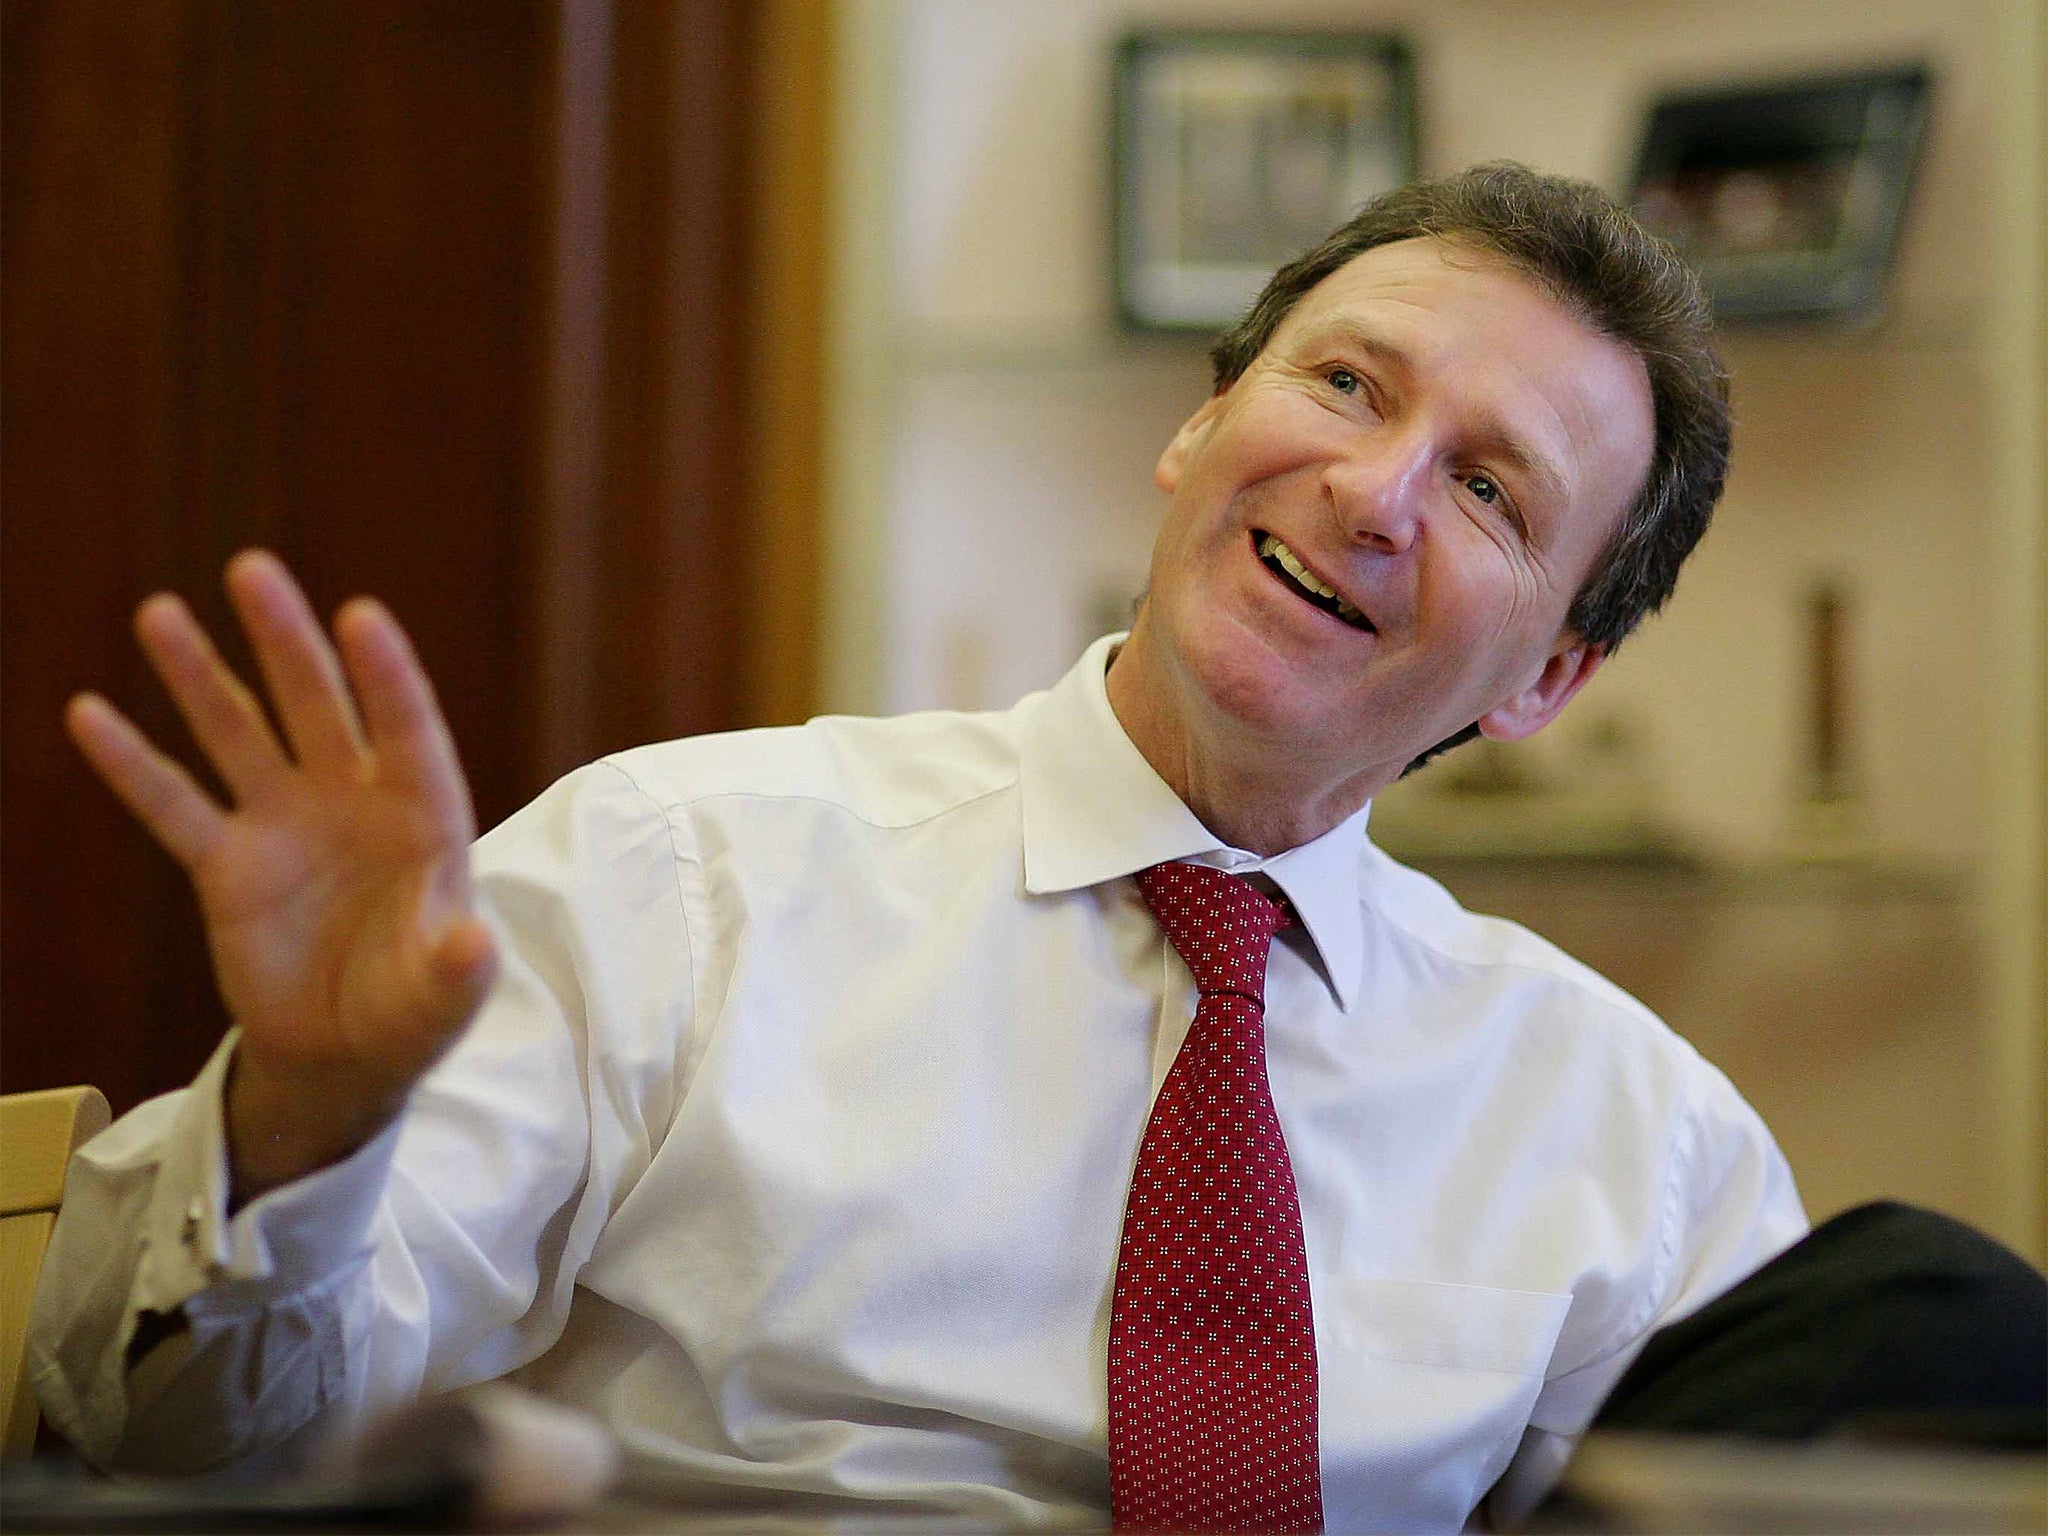 Lord Gus O’Donnell, the former Cabinet Secretary who earned the nickname ‘God’ while in Whitehall, will lead the What Works Centre for Wellbeing